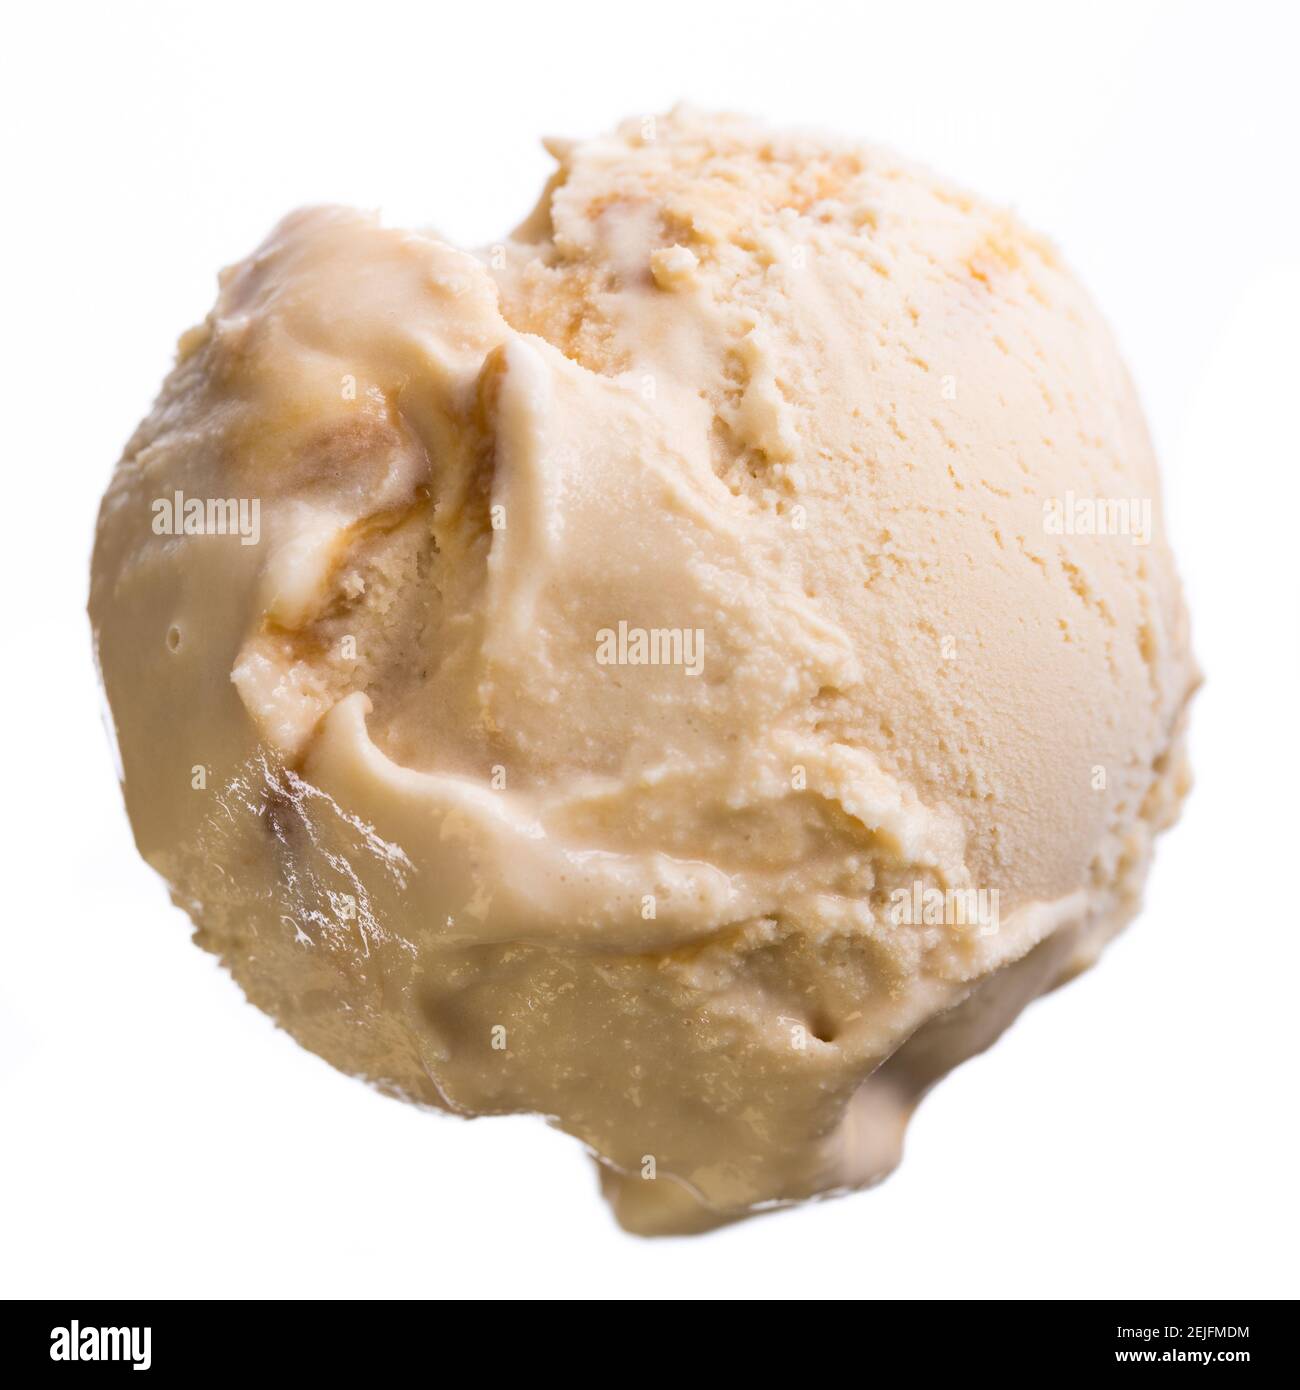 Single soft ball of dulce leche (sweet milk) ice cream from above isolated on white background Stock Photo